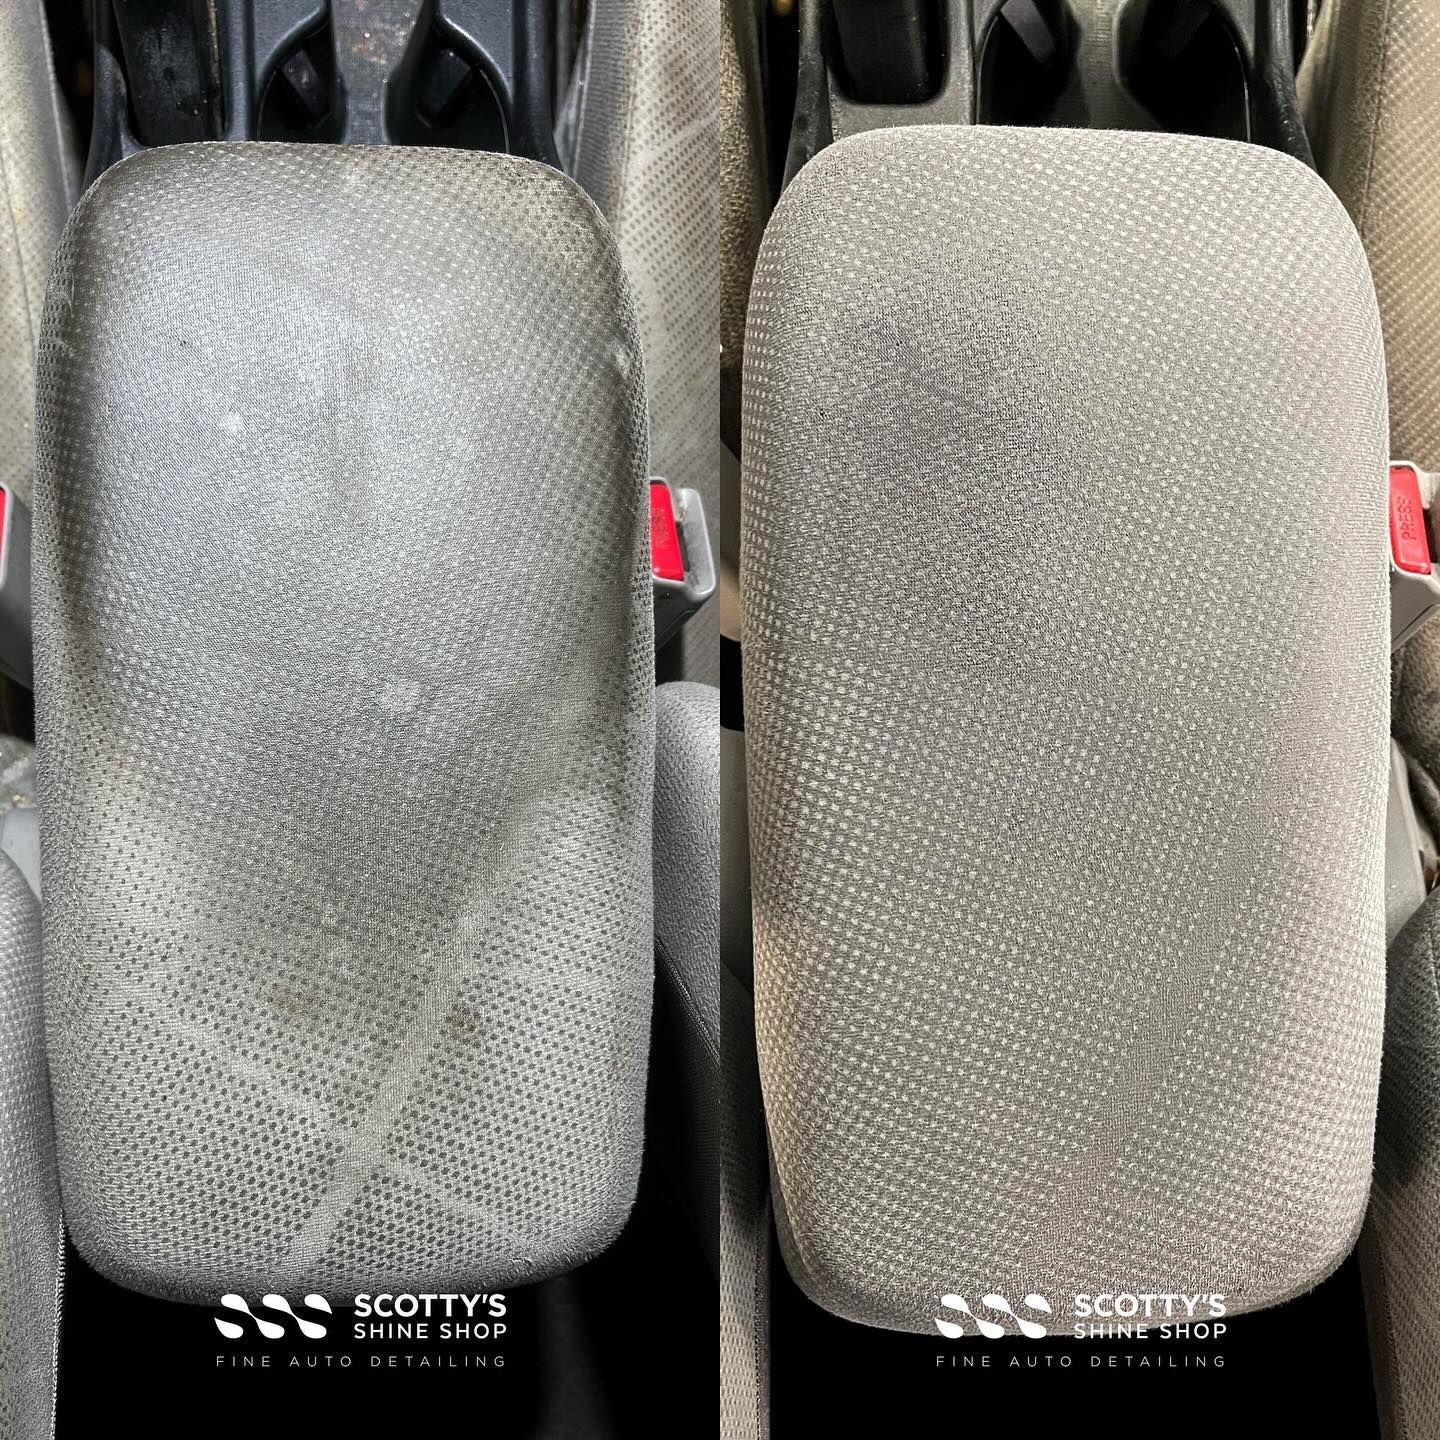 Car Detailing Before and After London, Ontario Canada